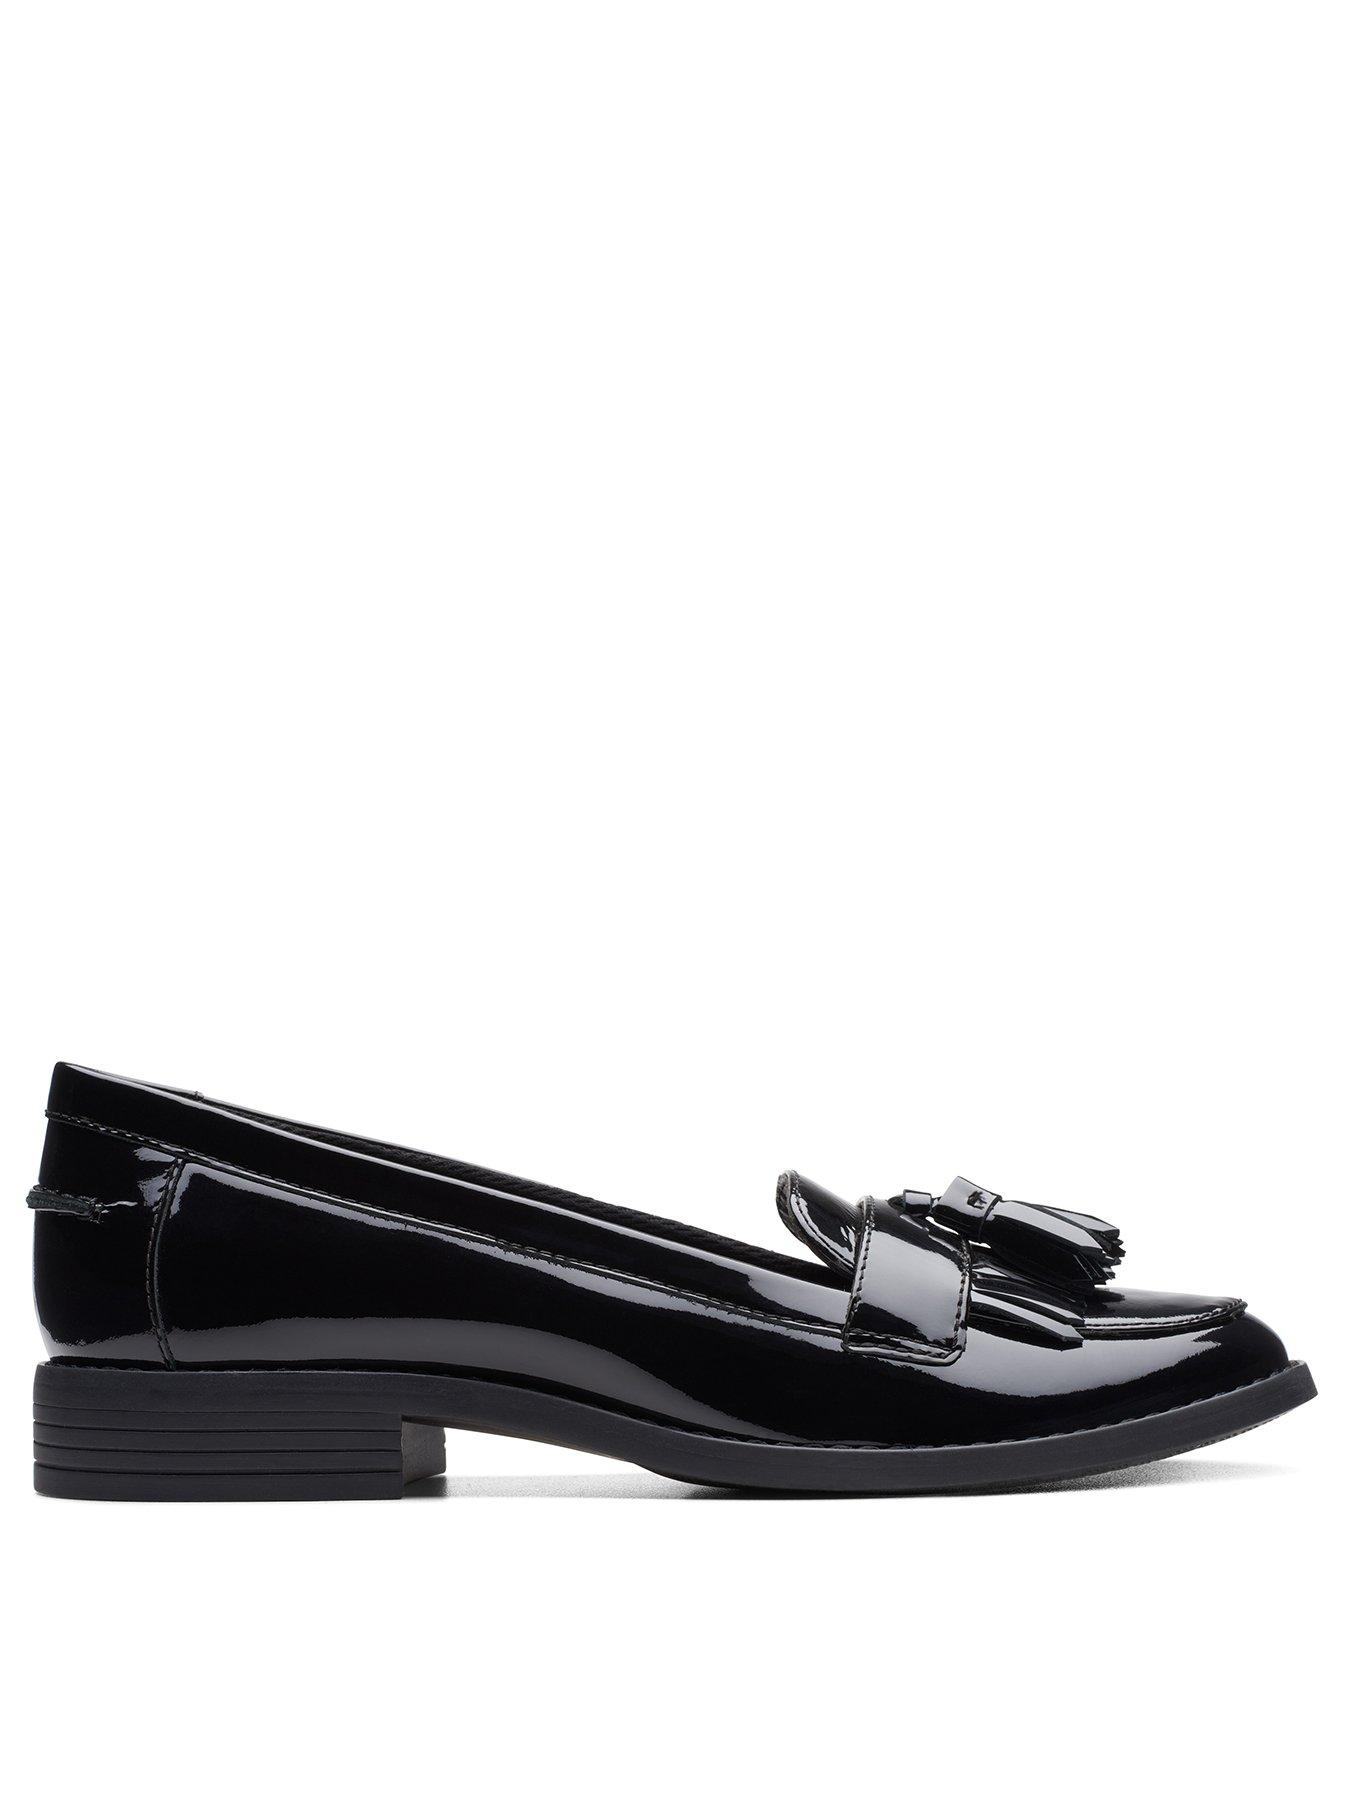 Clarks Camzin Angelica Shoes - Black Leather | littlewoods.com